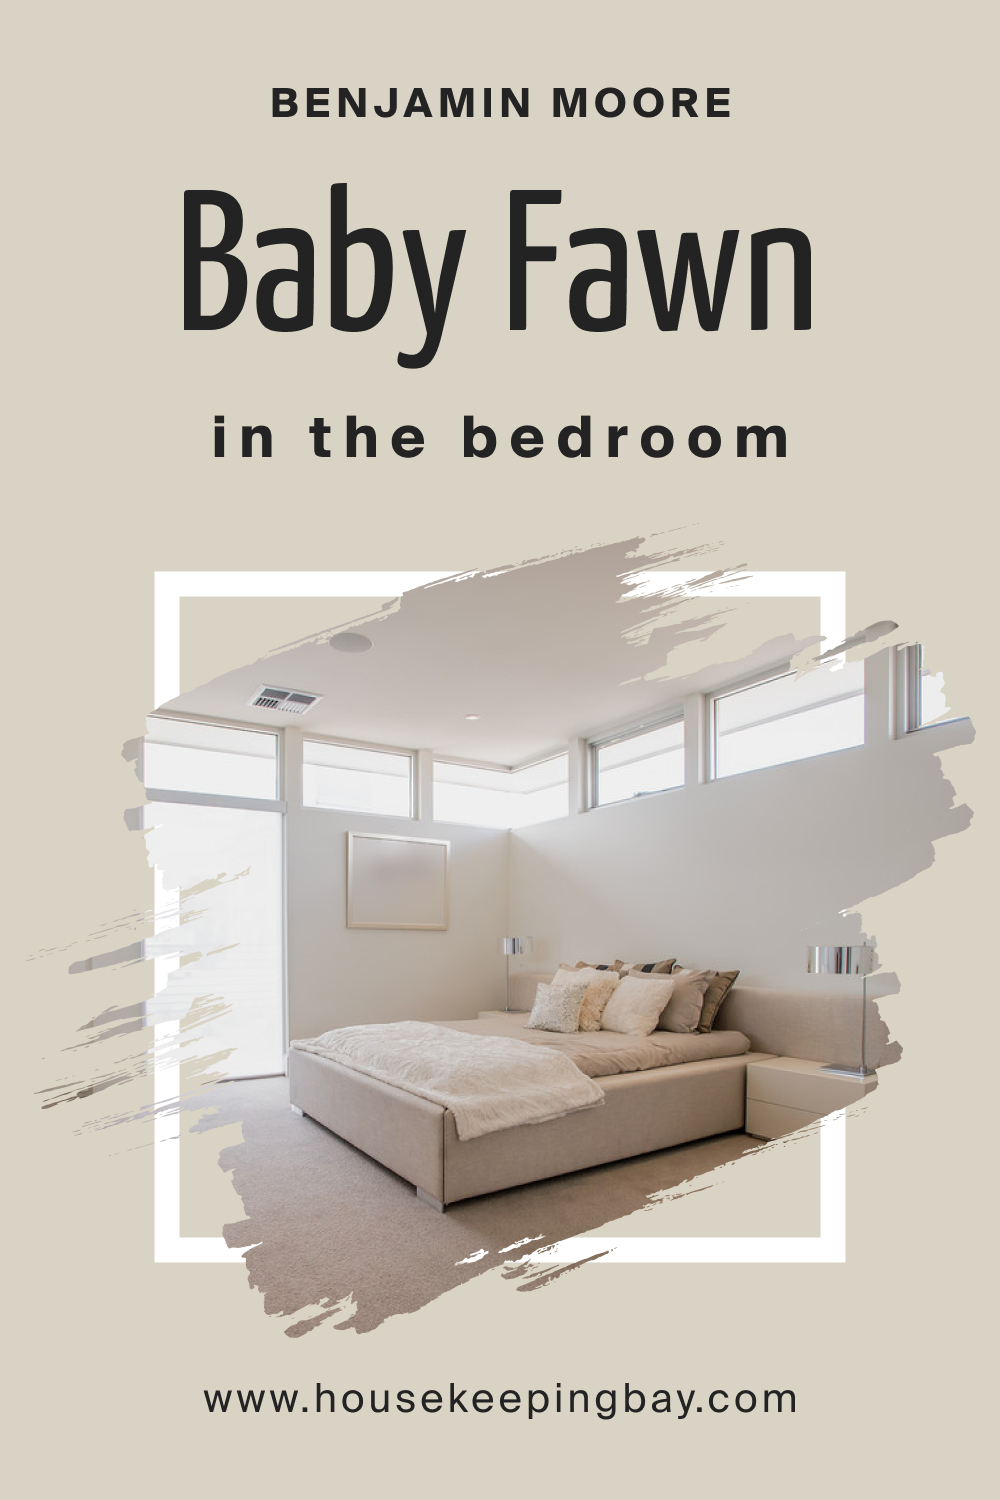 Benjamin Moore. Baby Fawn OC 15 for the Bedroom